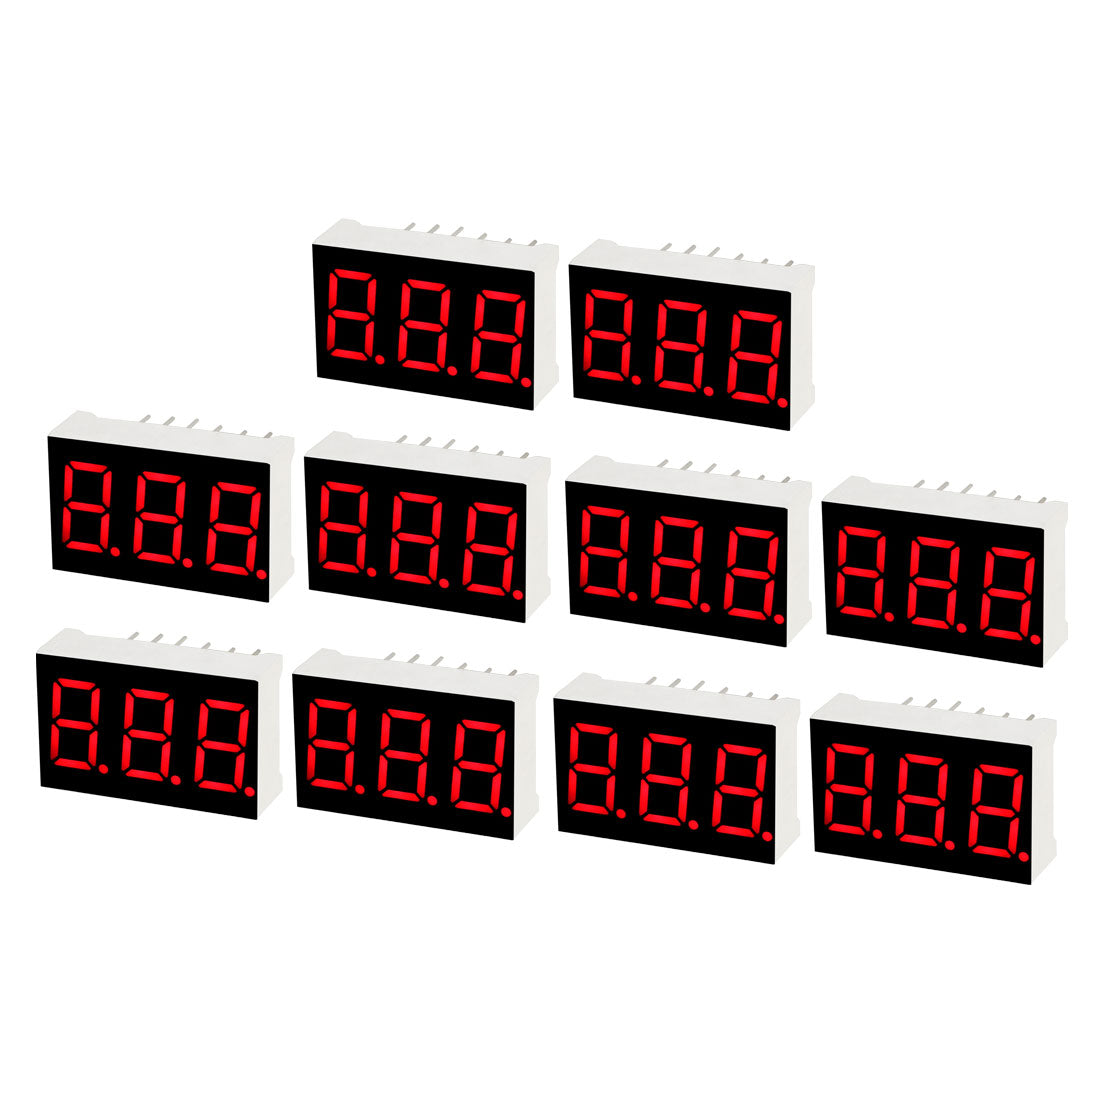 Uxcell Uxcell Common Anode 11 Pin 3 Bit 7 Segment 0.89 x 0.55 x 0.28 Inch 0.35" Red LED Display Digital Tube 2pcs